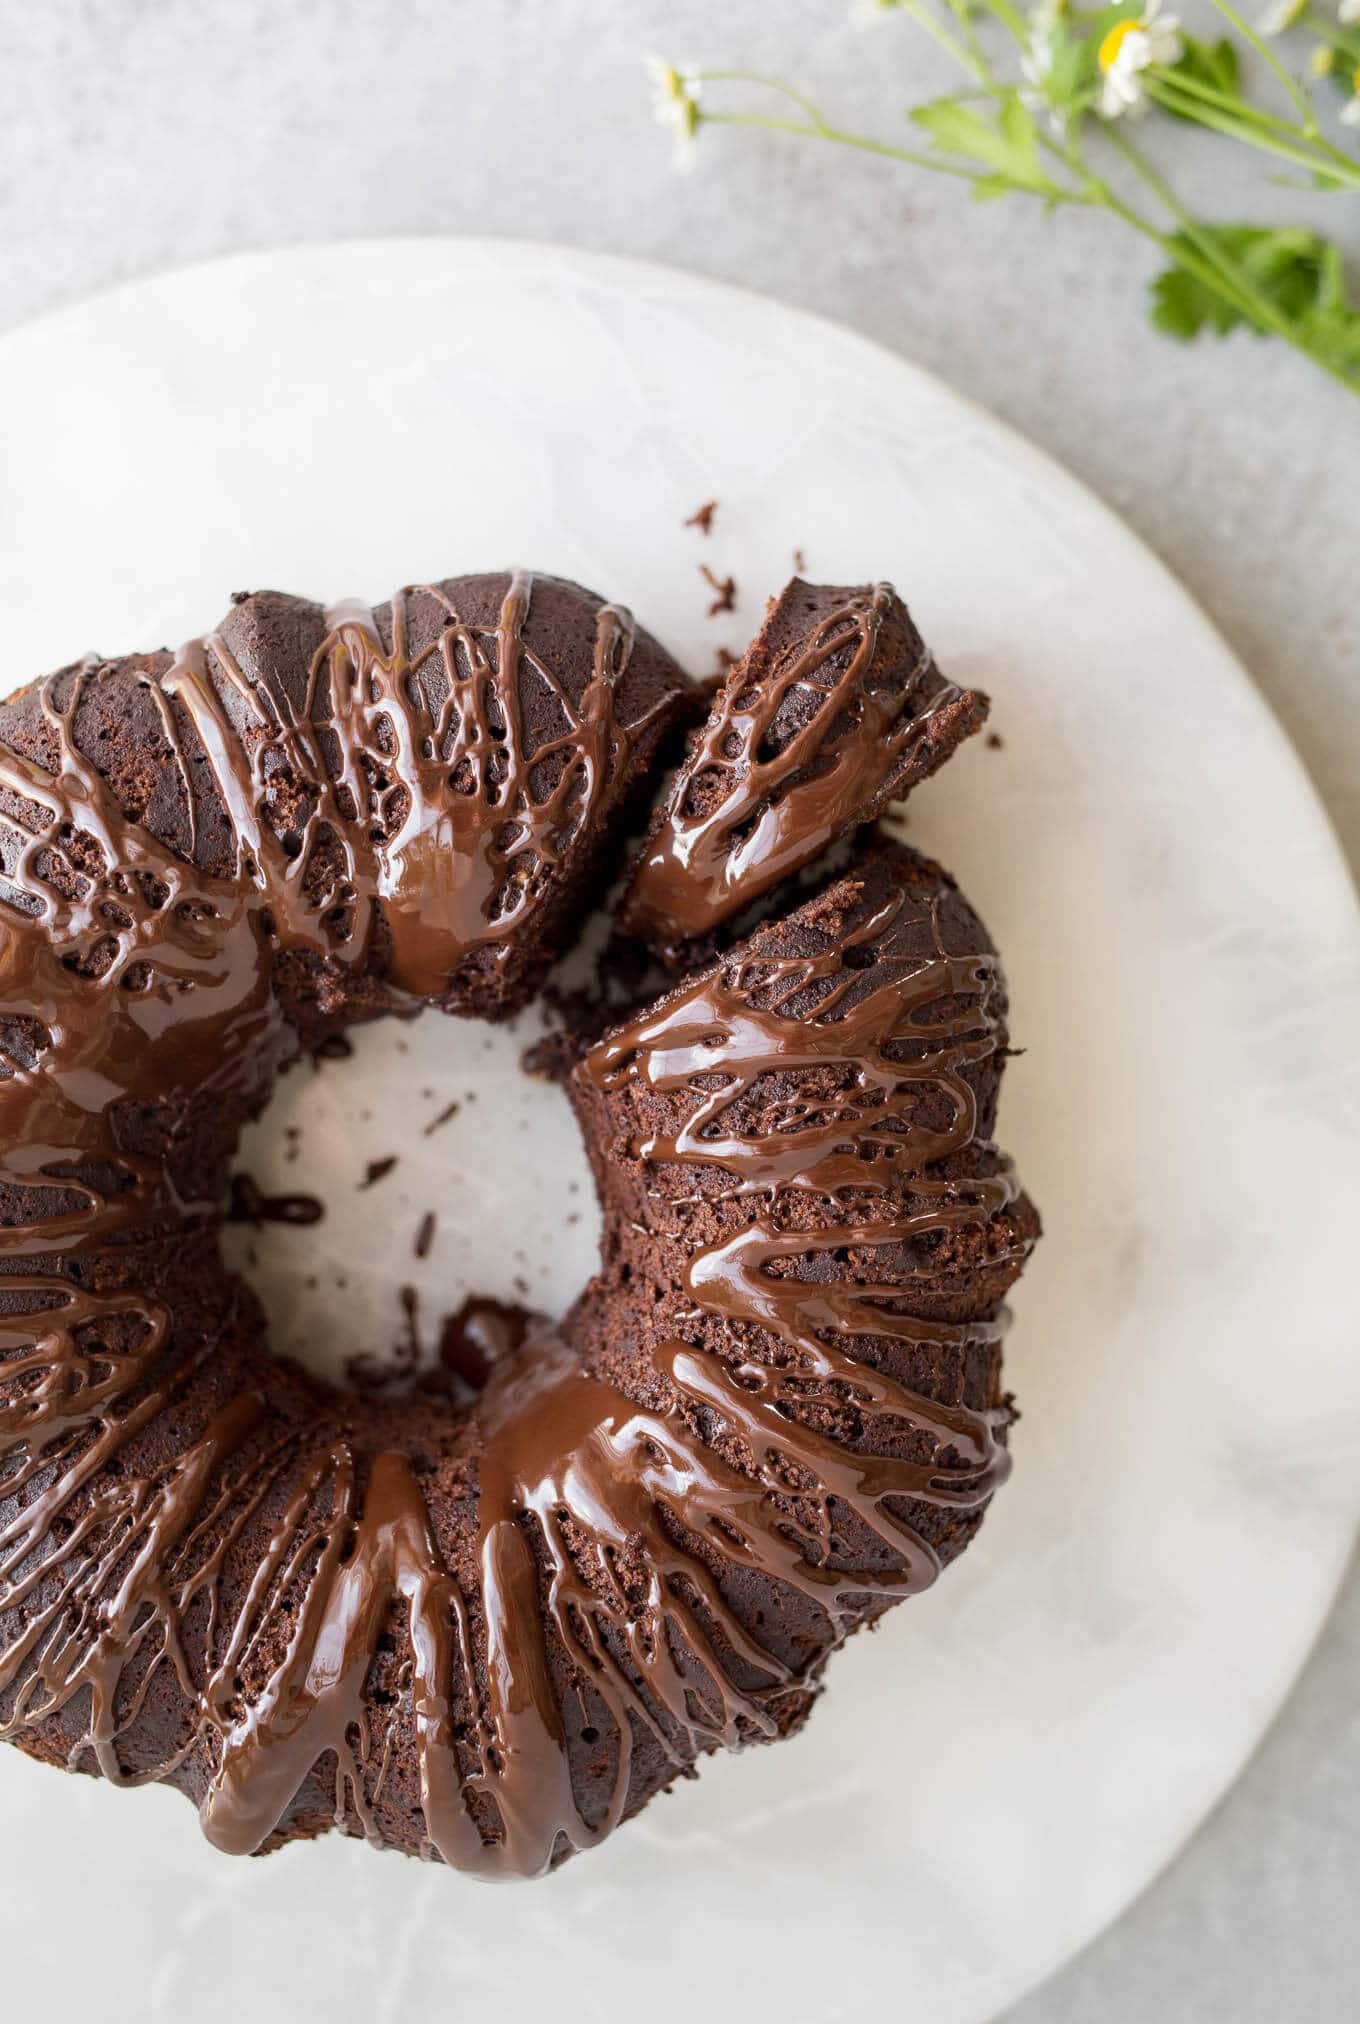 This rich, moist Gluten-Free Chocolate Zucchini Cake is a one-bowl recipe that uses wholesome almond flour and unrefined coconut sugar. Gluten-free, dairy-free.